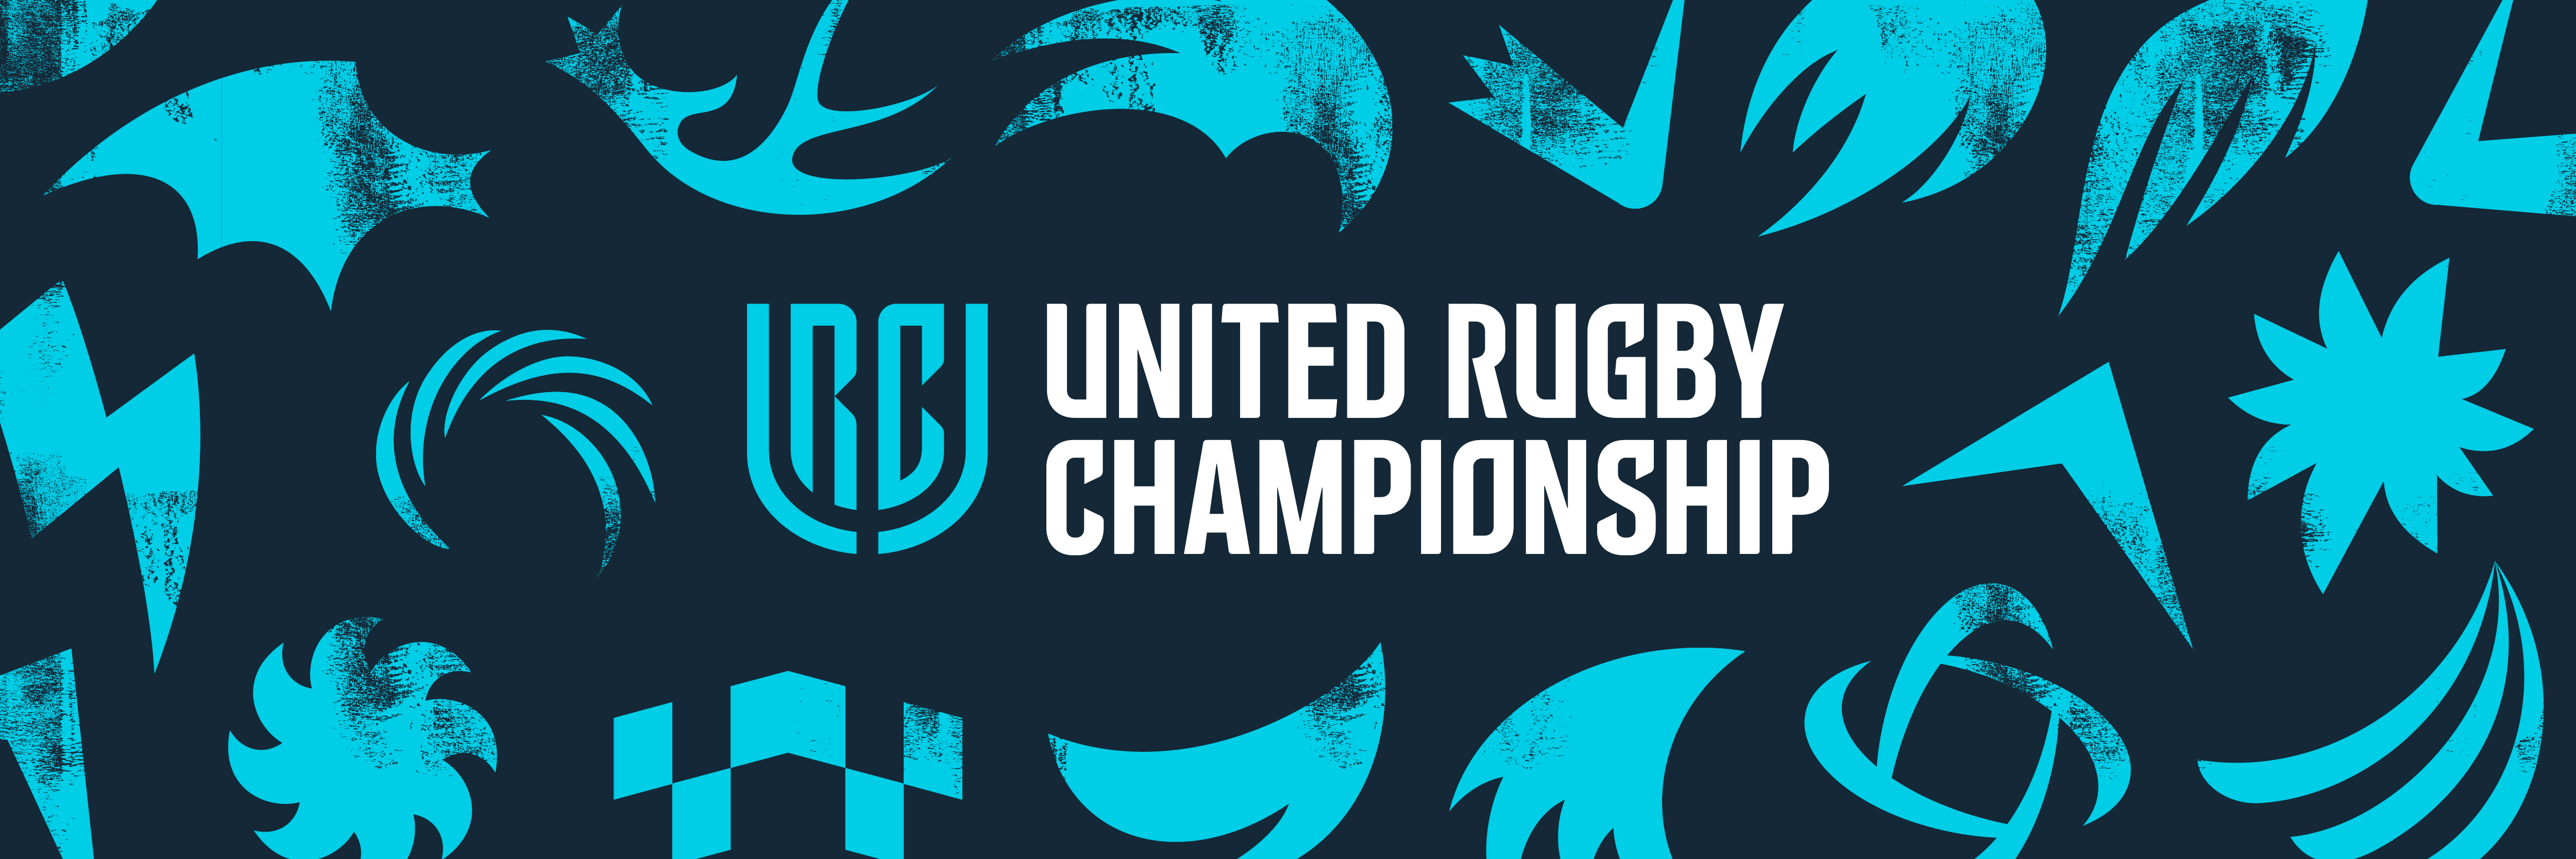 URC Fixtures – Connacht, Leinster, Munster and Ulster starting teams